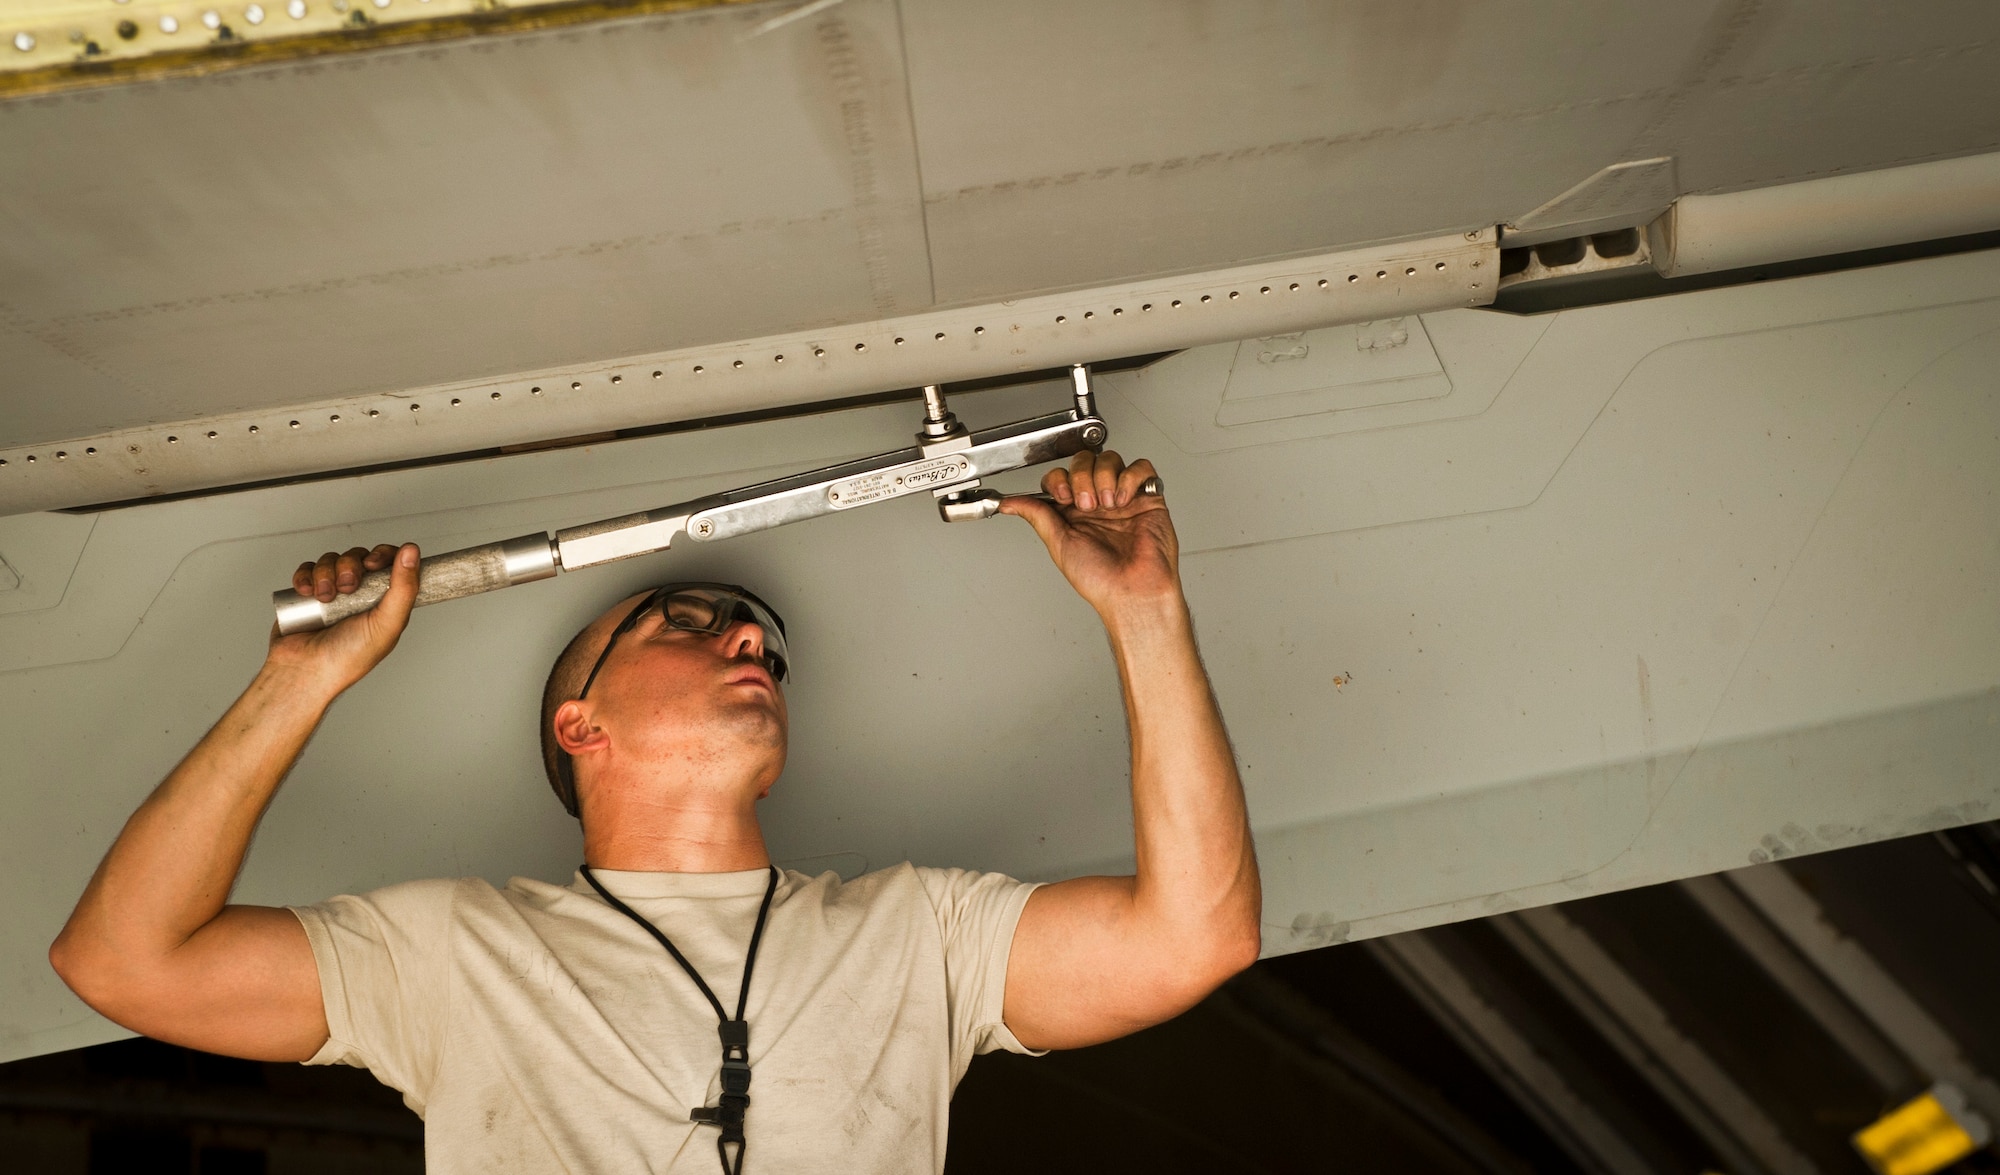 SrA William Fine, an aircraft phase maintenance specialist with the 455th Expeditionary Maintenance Squadron, works on the wing of a U.S. Air Force A-10 Thunderbolt II during phase maintenance at Bagram Airfield, Afghanistan, August 8, 2012. The Airmen adhere to a strict schedule of maintenance to keep Bagram’s aircraft safe and operational. (U.S. Air Force Photo/Capt. Raymond Geoffroy)